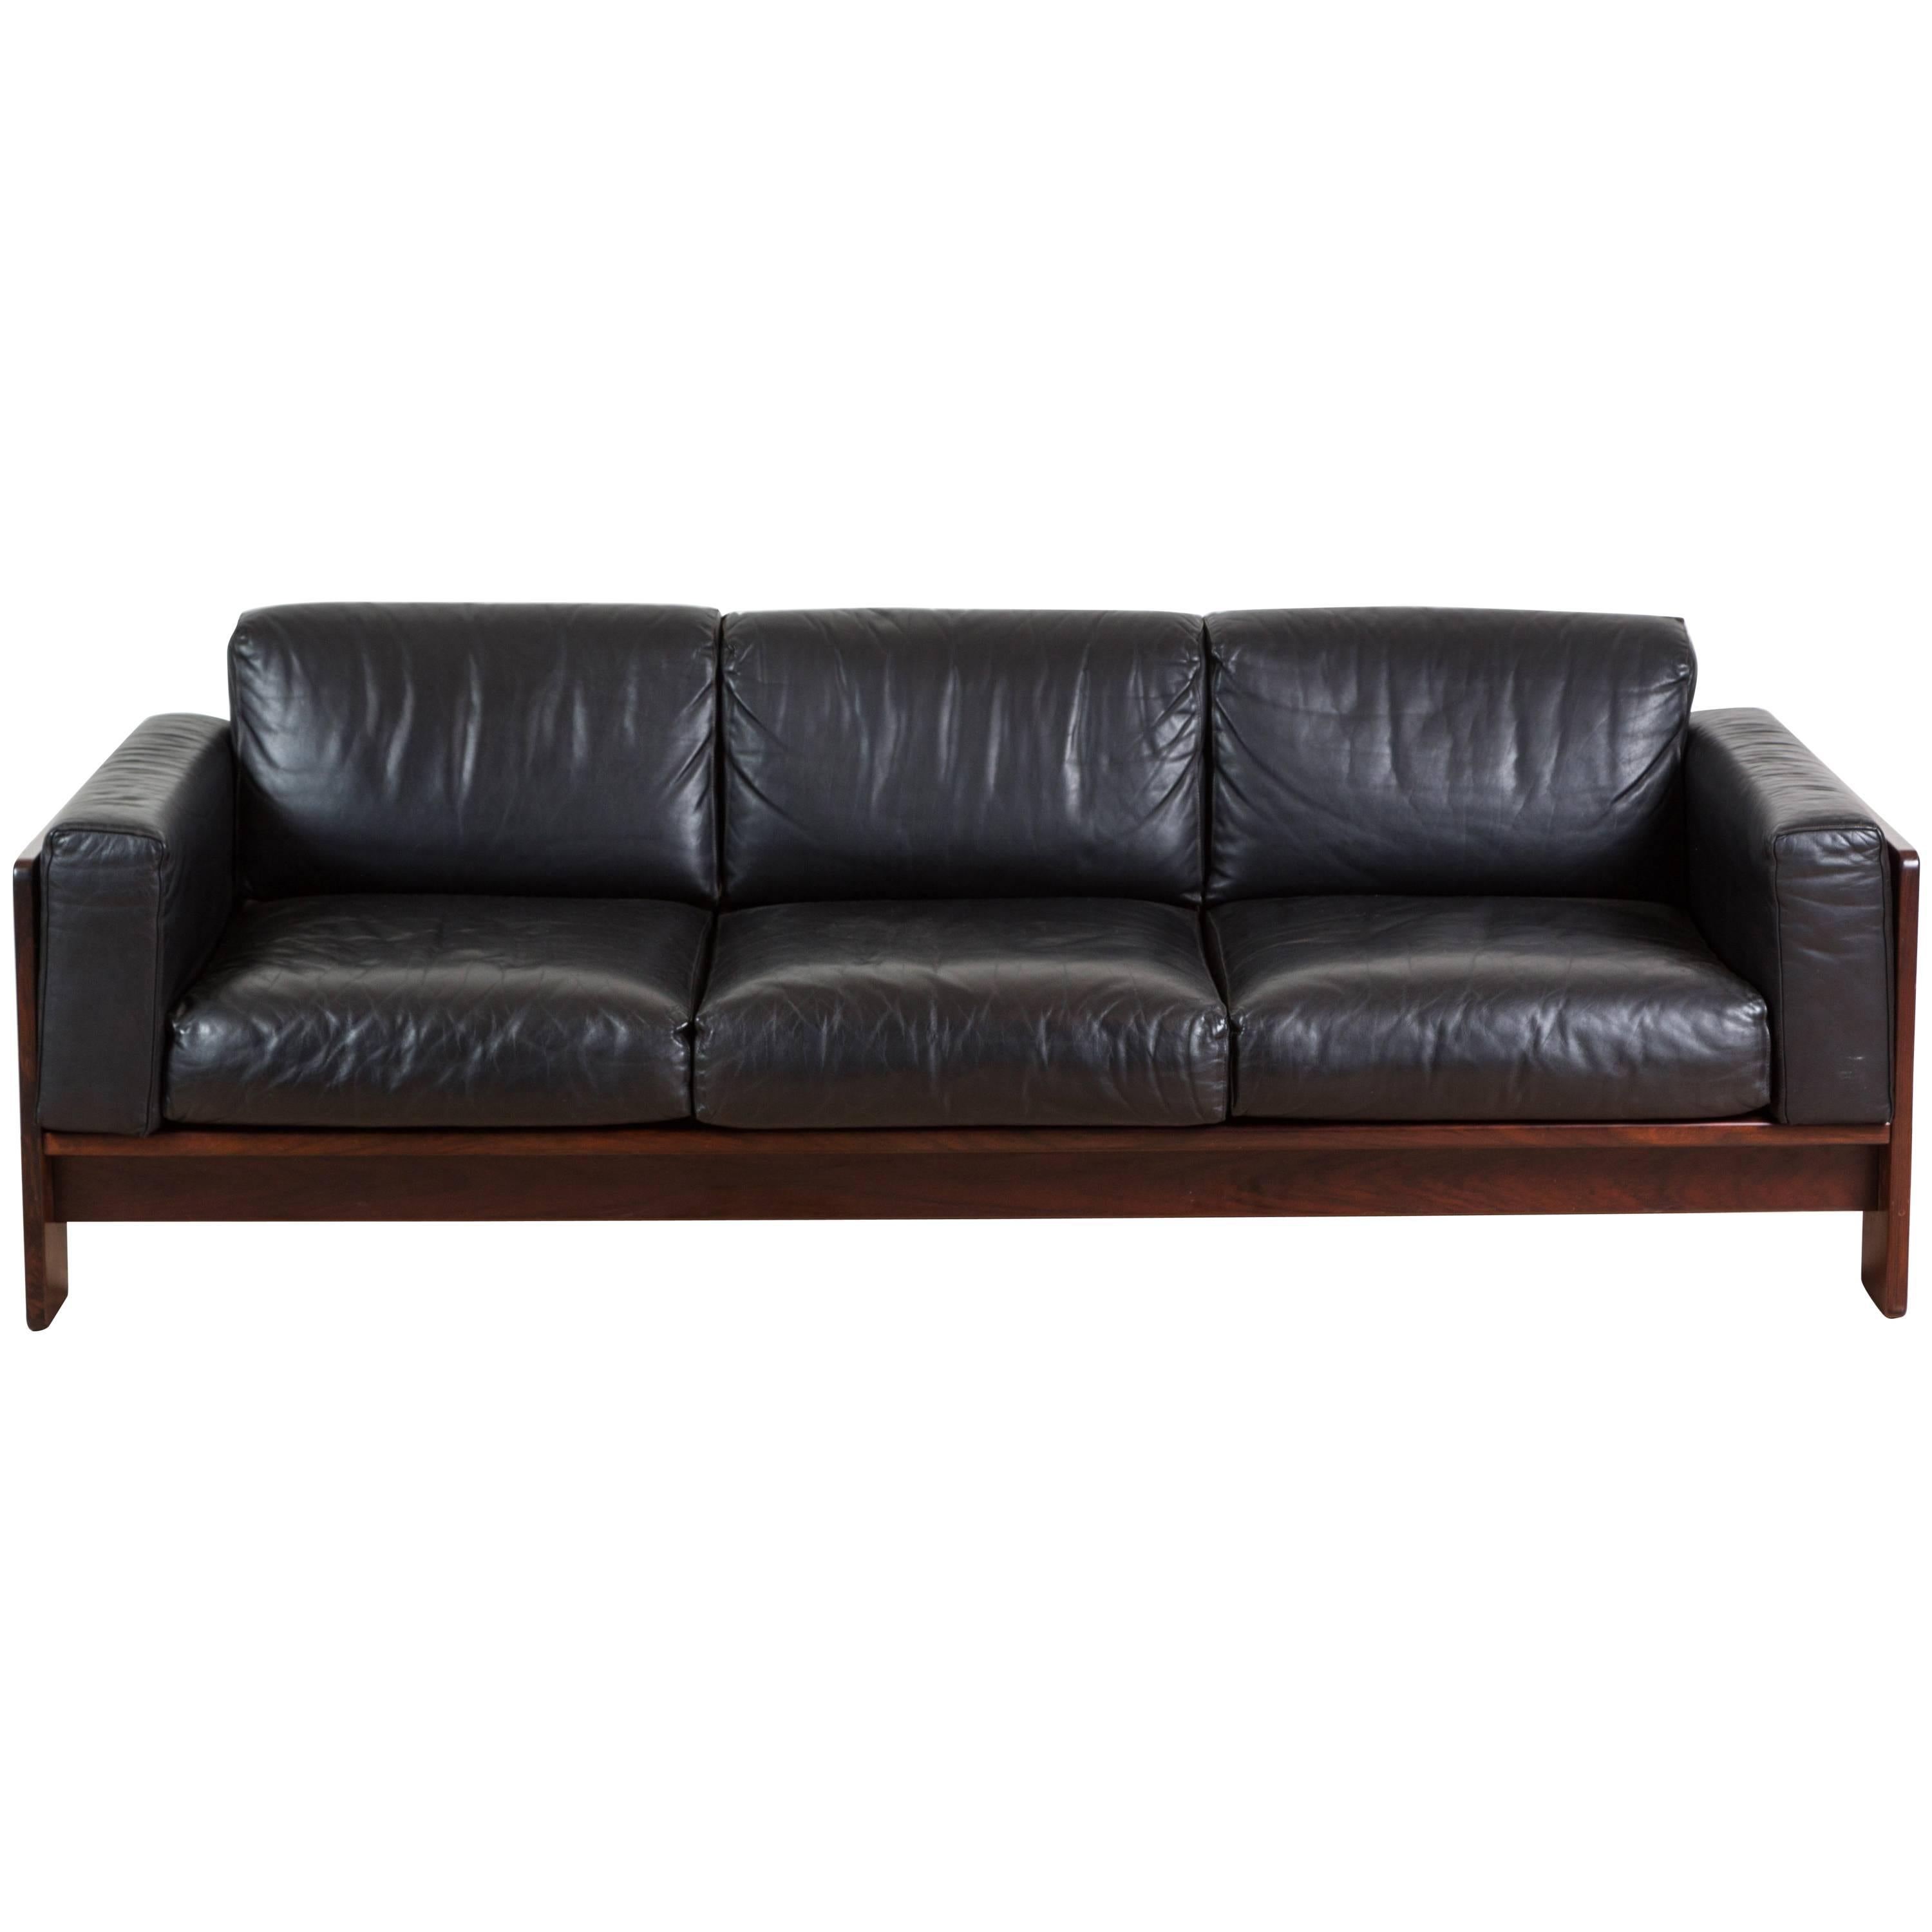 Rosewood Bastiano Sofa by Tobia Scarpa for Knoll